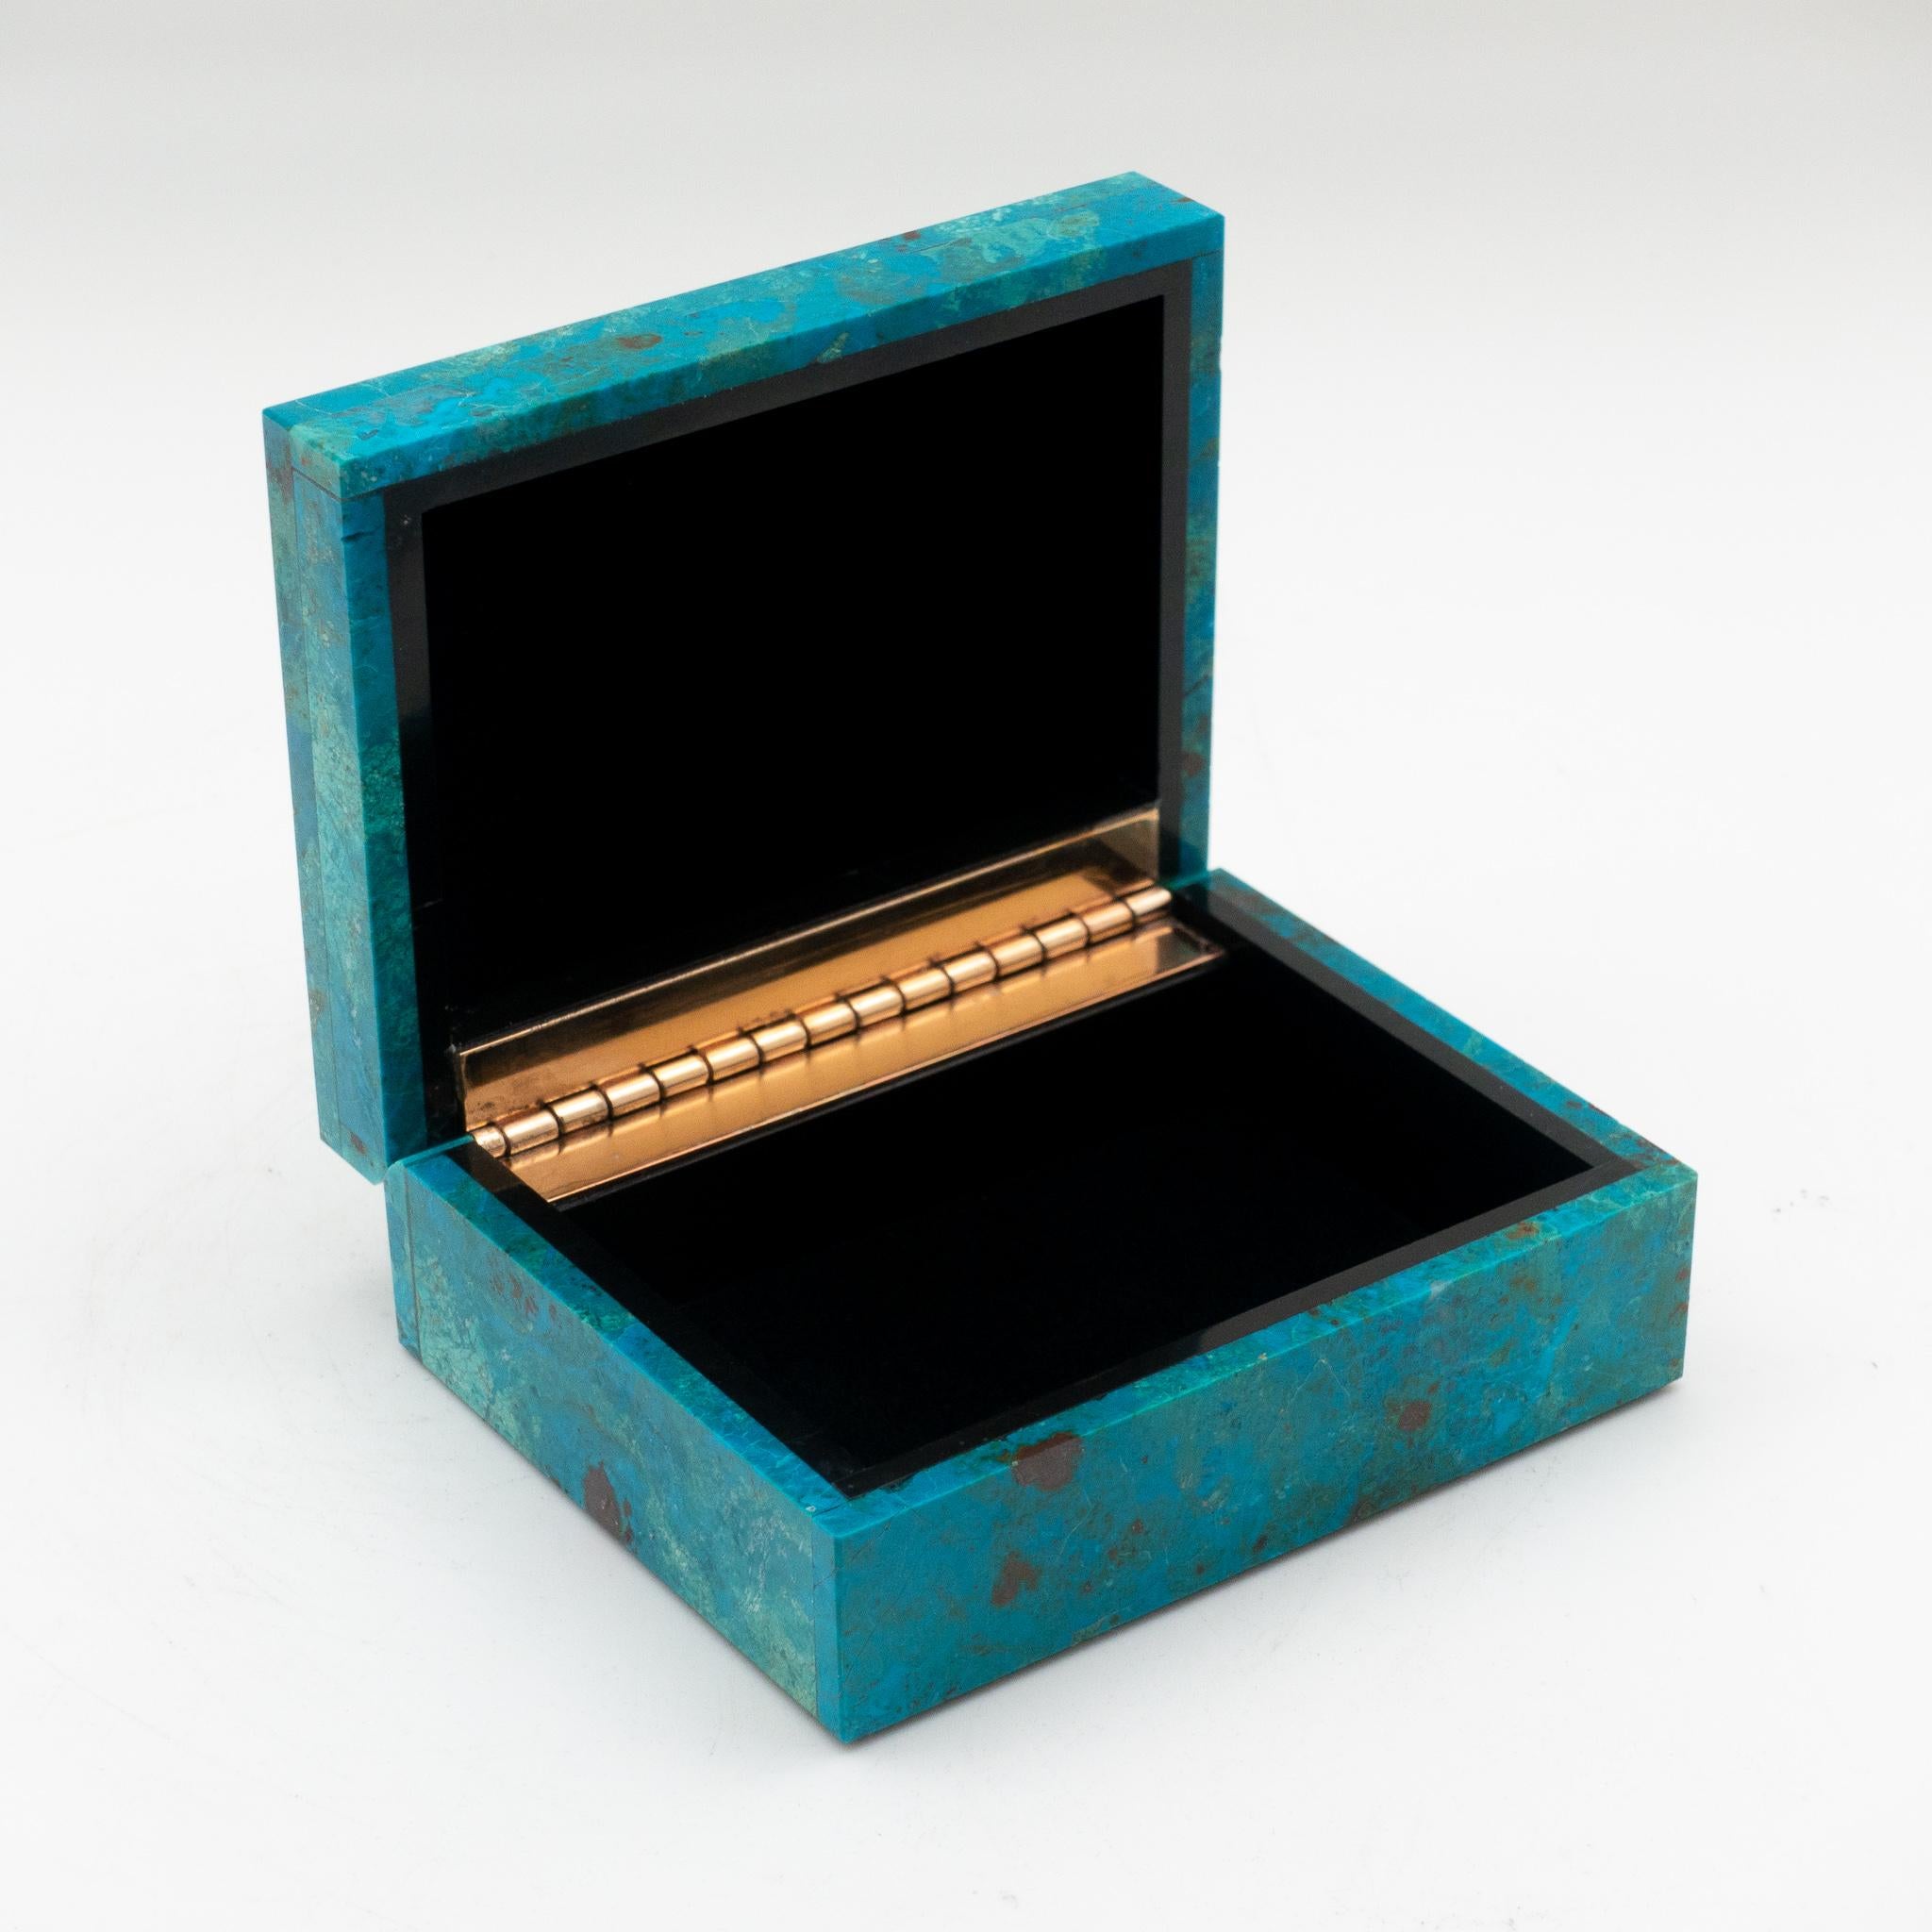 Chrysocolla hinged box; minerals sourced from Peru then sent to India to produce this exquisite box.
Chrysocolla has also been popular for use as a gemstone for carvings and ornamental use since antiquity due to its vivid, beautiful blue and